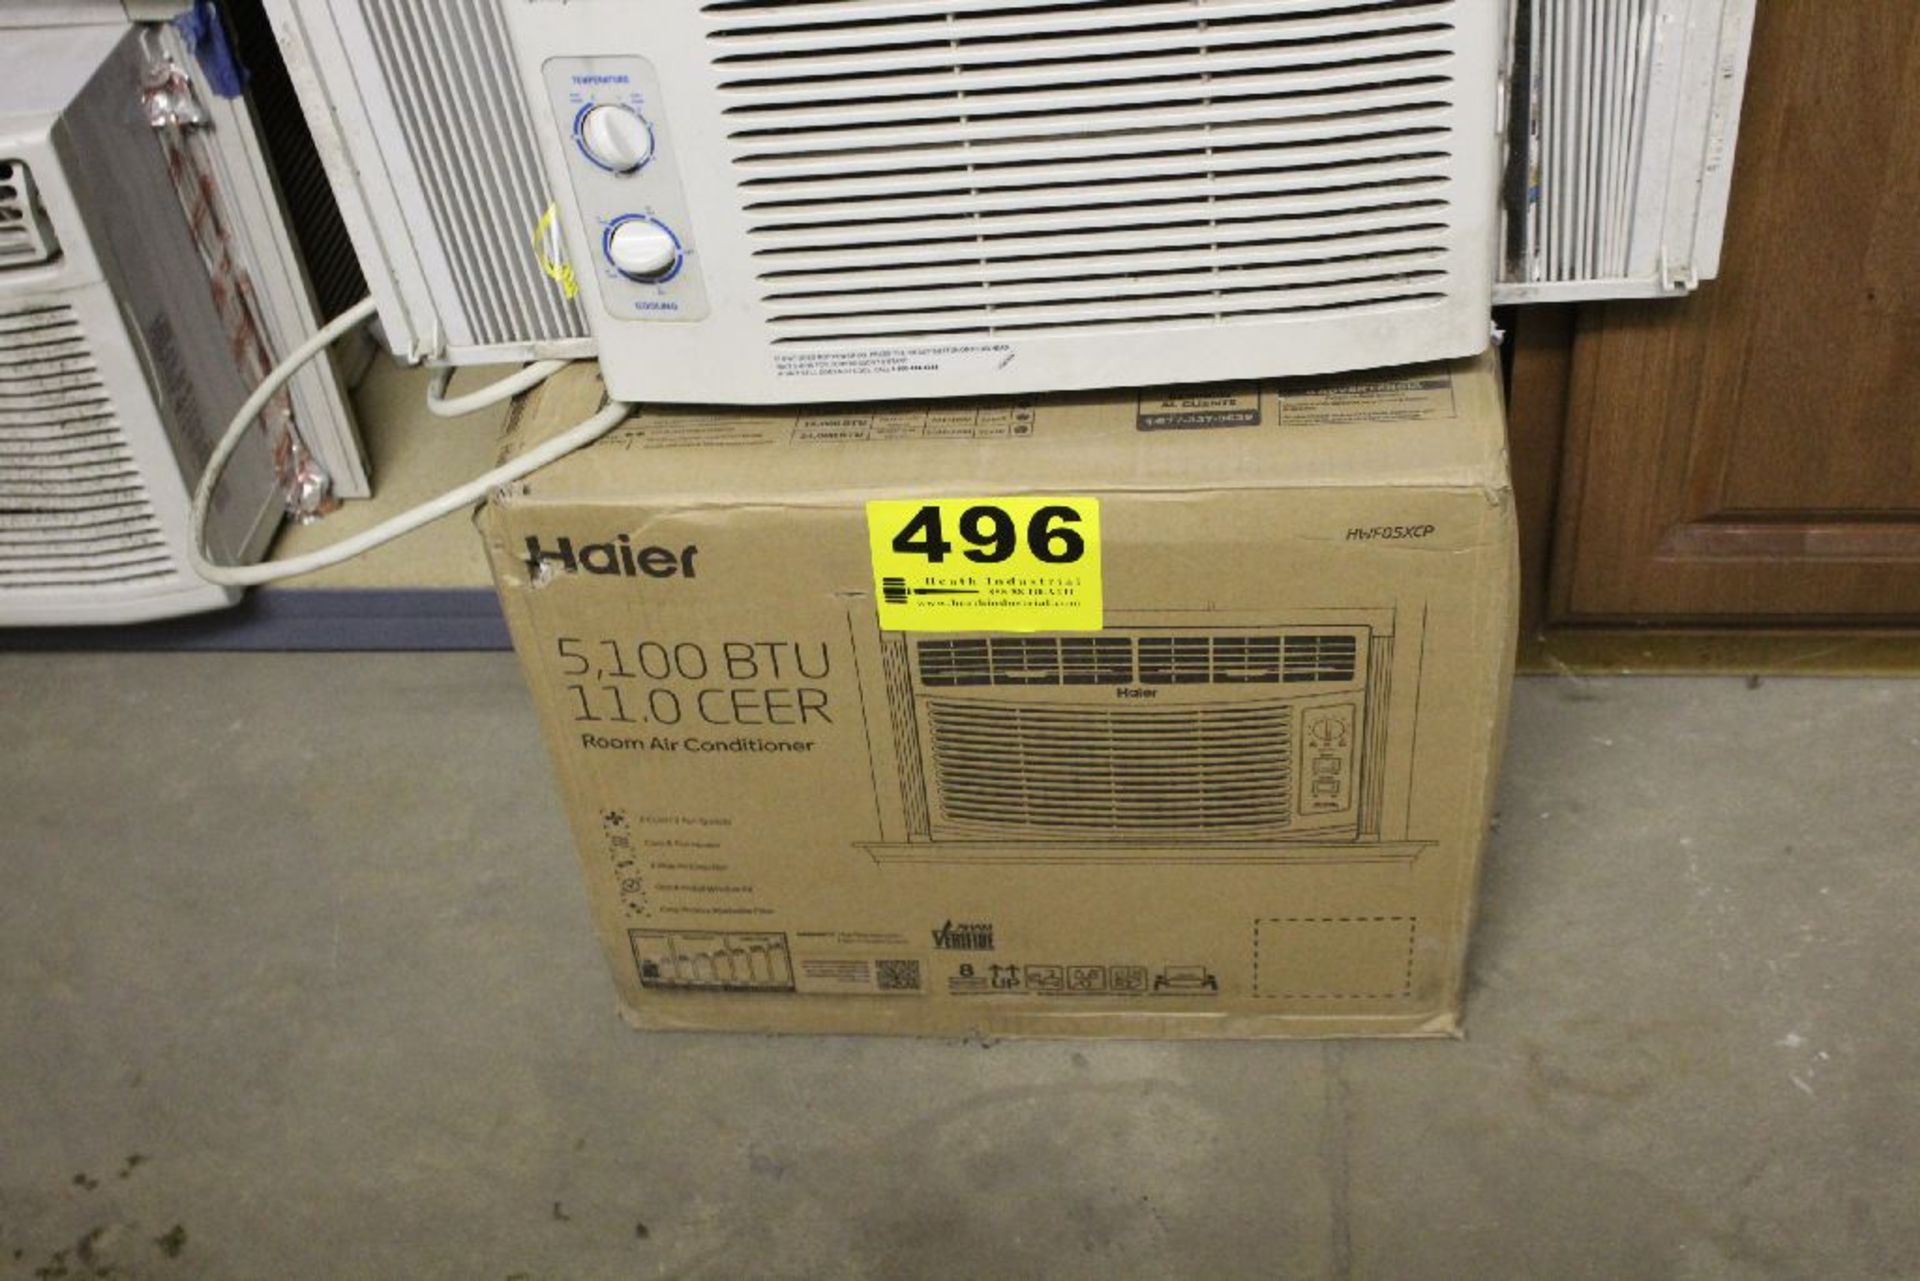 HAIER 5100 BTU WINDOW AIR CONDITIONER (APPEARS NEW IN BOX)